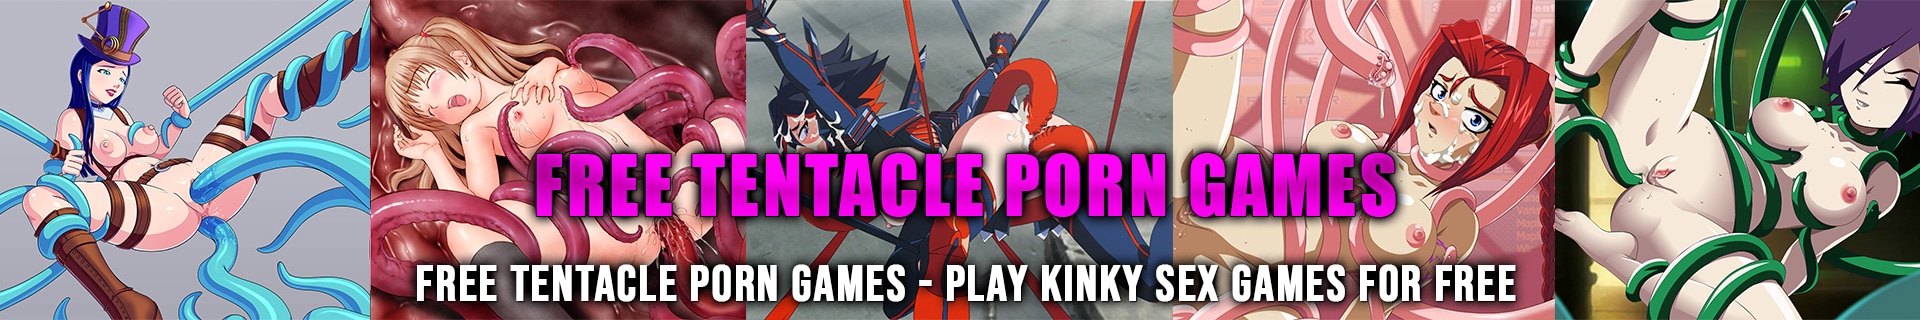 Free Tentacle Porn Games - Free Tentacle Porn Games â€“ Anime Porn Games From Japan